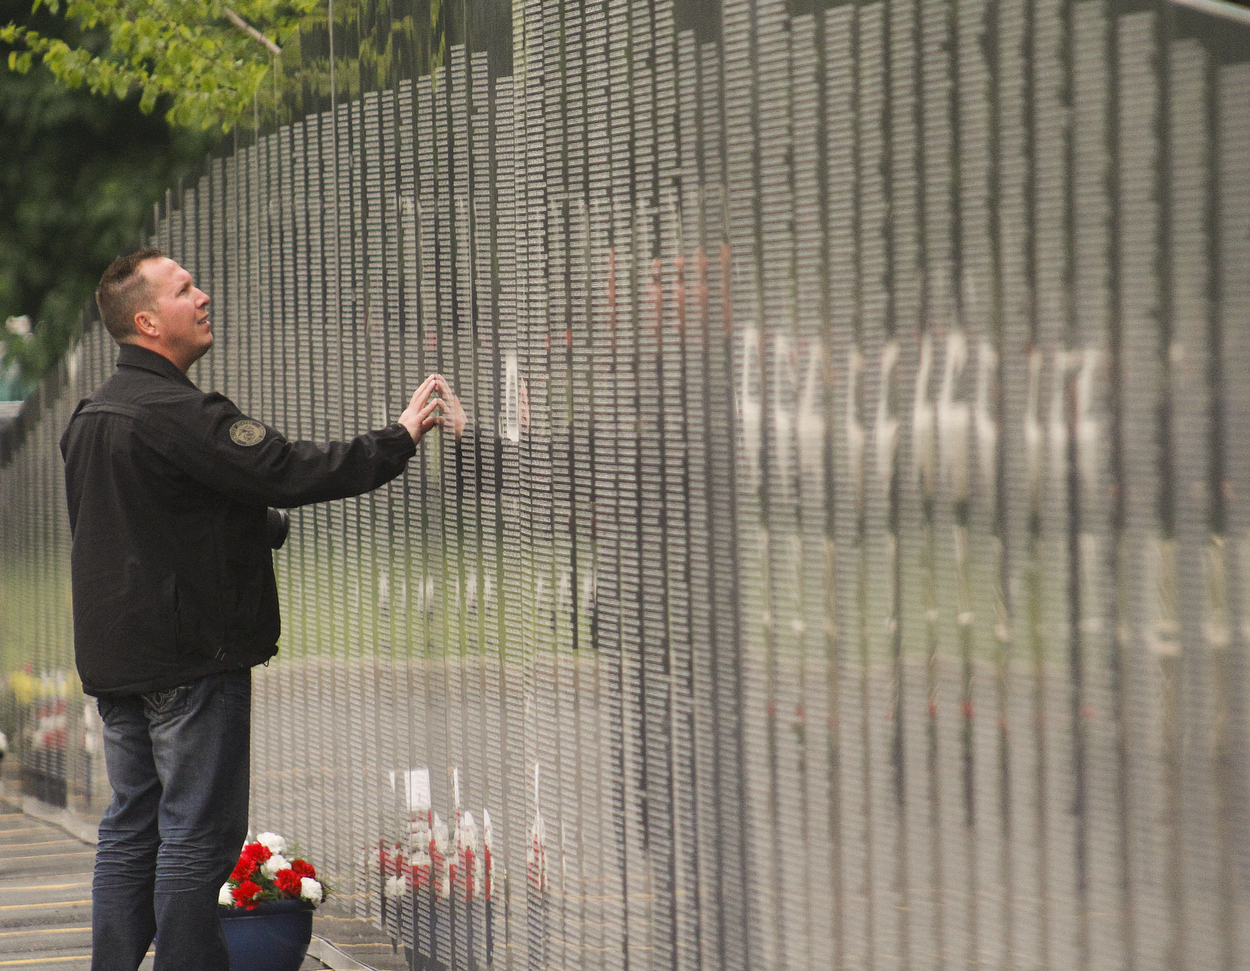        ROBERT K. YOSAY  | THE VINDICATOR.. Austintown ex Marine James Skok... at the wall..YSU - "the Reading of the Name" an annual service to honor the YSU students and faculty that lost their lives in service to the country was combined this year with the The American Veterans Traveling Tribute/Vietnam Traveling Wall -Wednesday through Sunday...The 360-foot-long wall, an 80-percent scale version of the Vietnam Memorial Wall in Washington, D.C., will be open for viewing round-the-clock in the parking lot on Wood Street at YSU..-..                    -30-